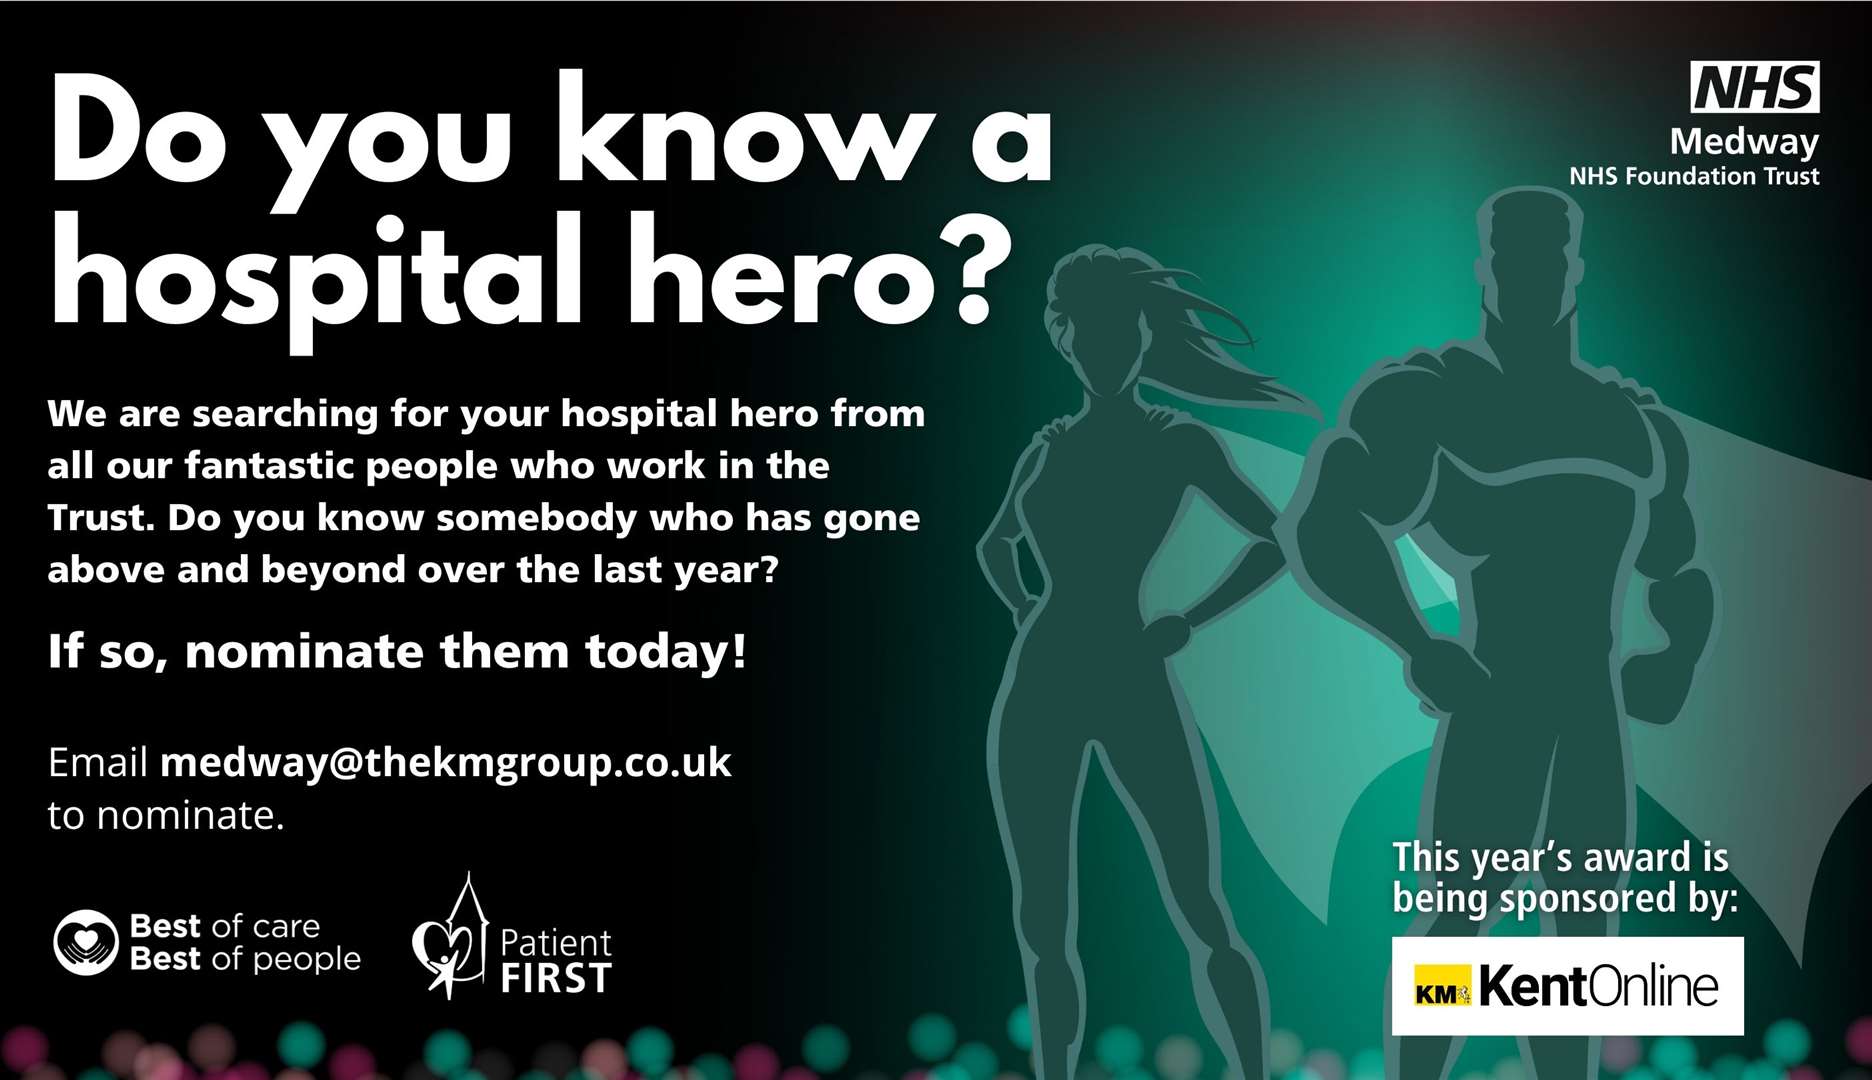 Nominations for the 2023 Hospital Hero Award are open